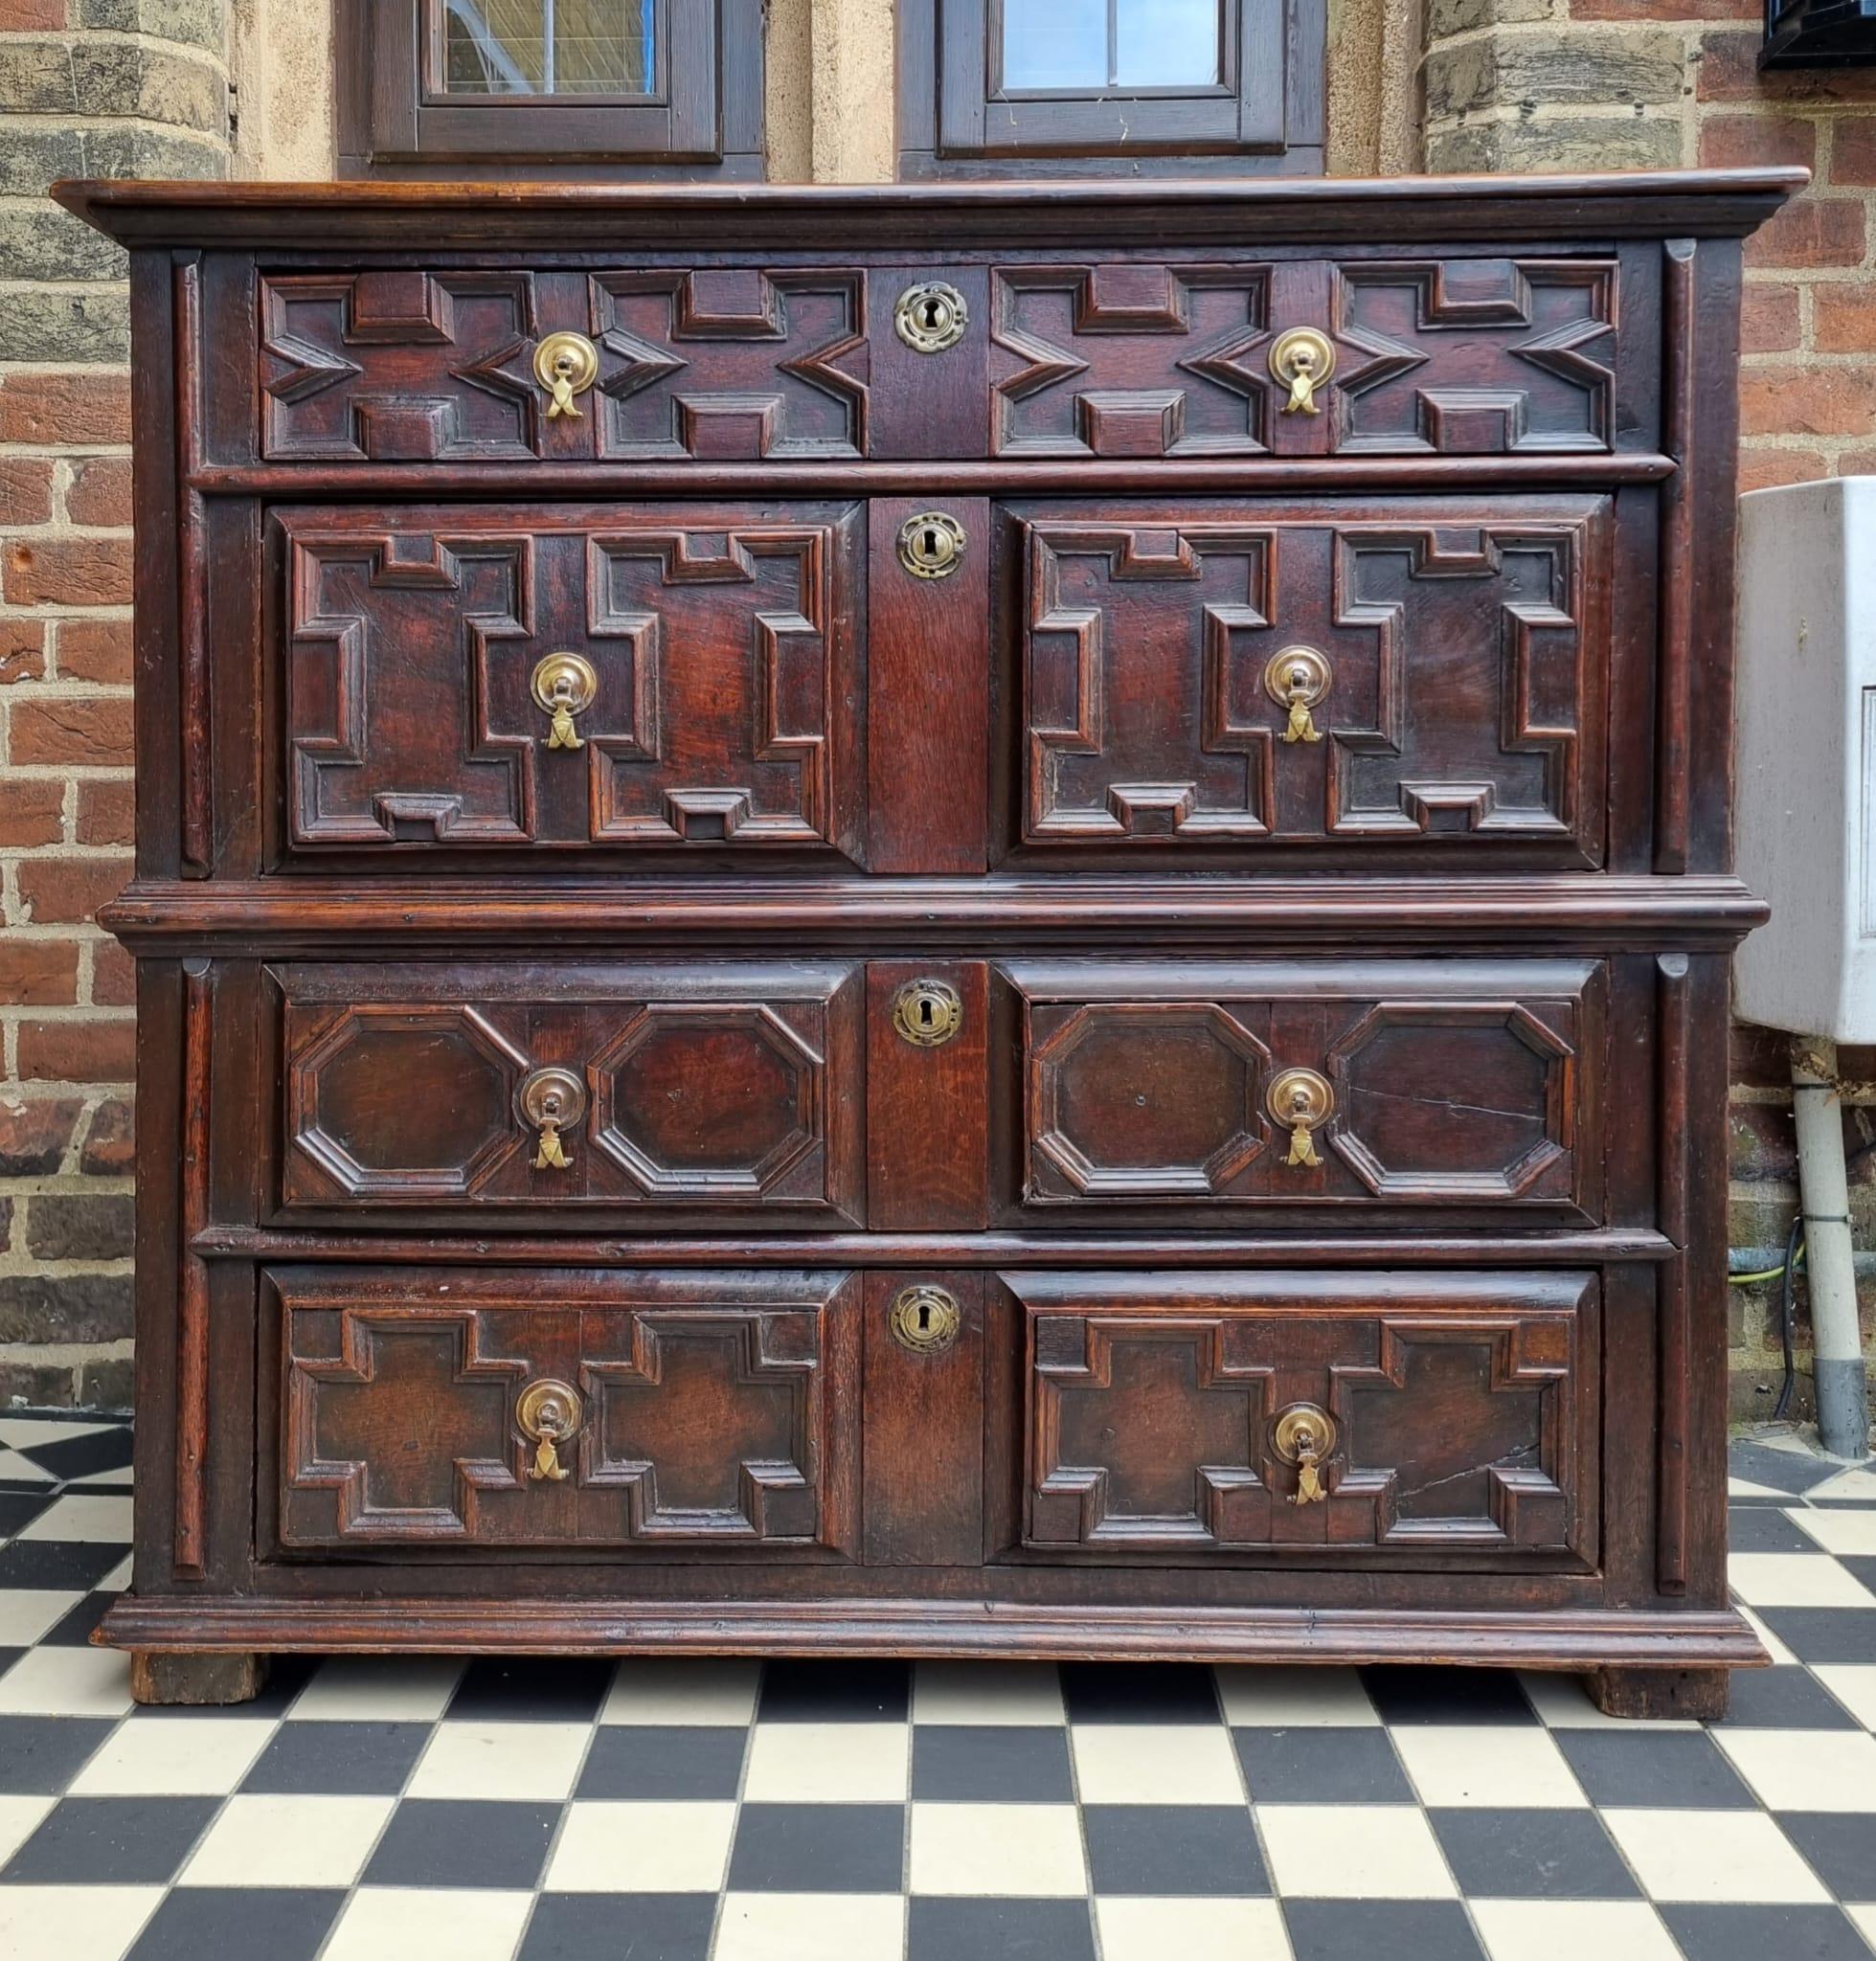 A superb 17th-century Charles II geometric chest of drawers. It features a rectangular planked top . The chest has four long drawers, lined with oak ,  brass drop handles, escutcheons. It stands on its original stile feet . Outstanding rich warm